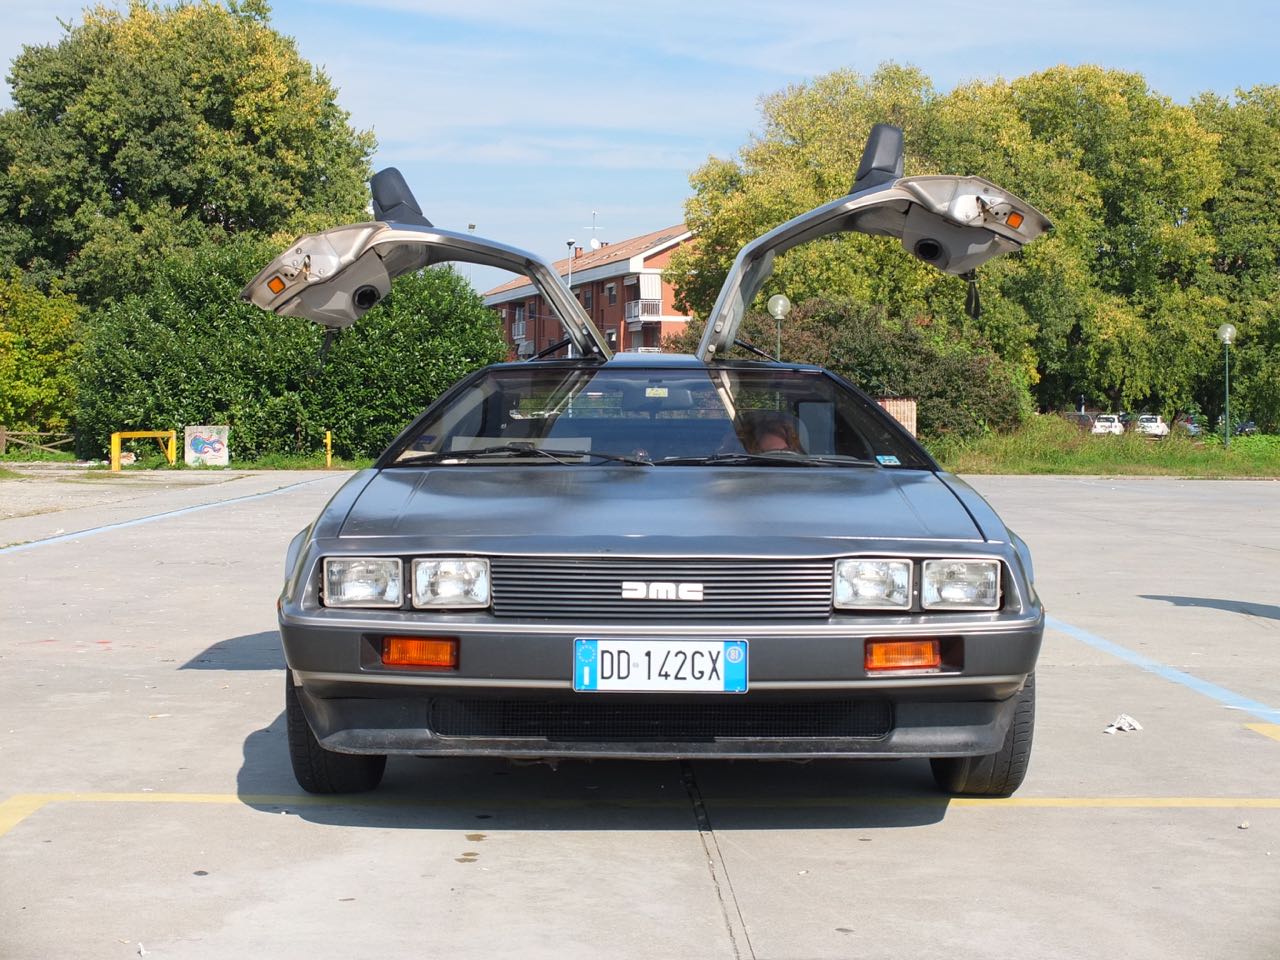 Back to the Future Museum